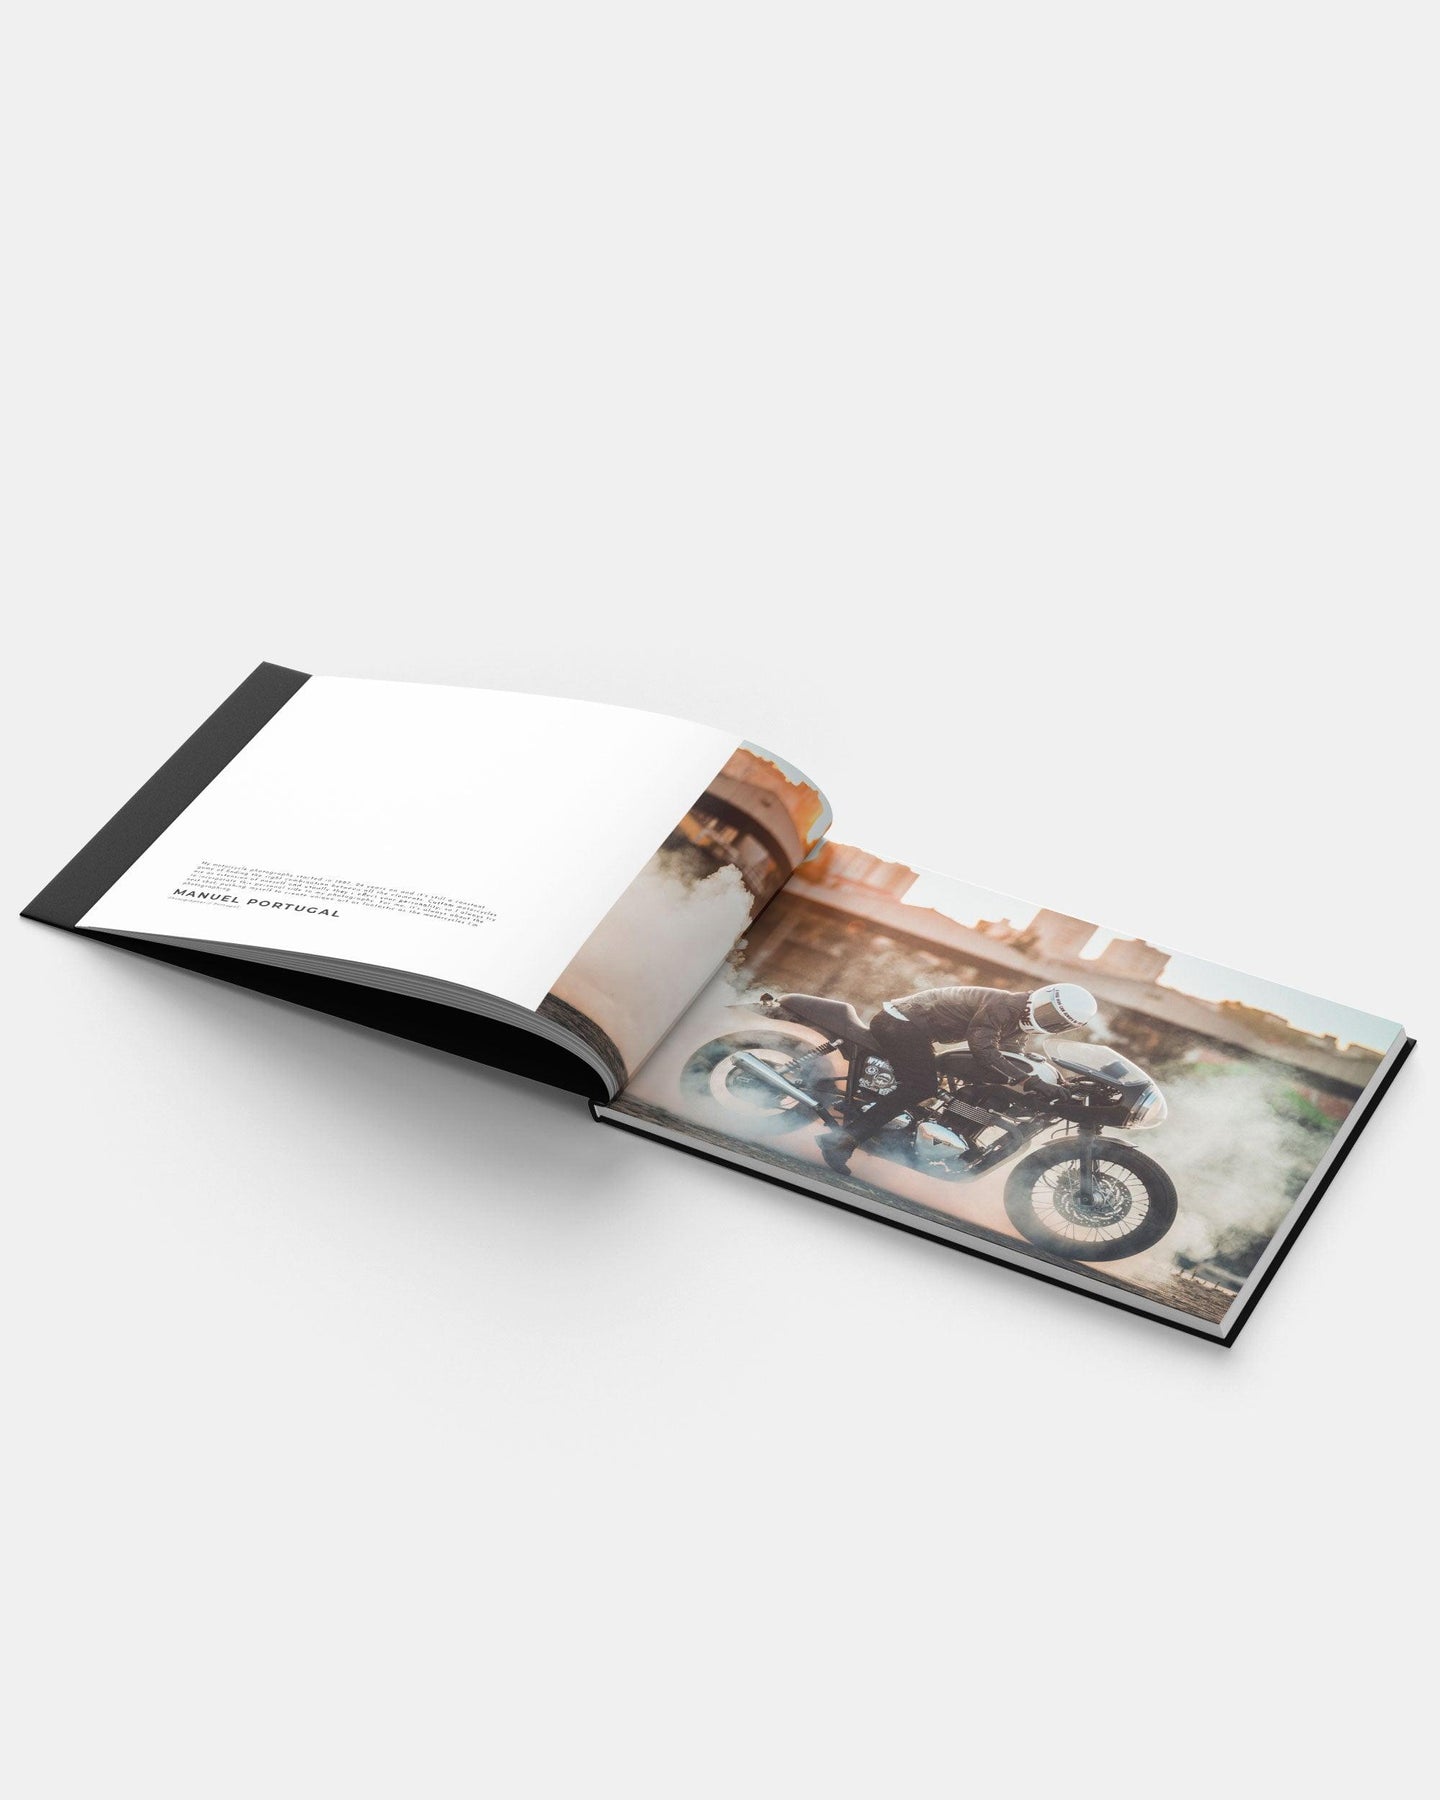 THE RACER WITHIN MOTORCYCLE PHOTO BOOK